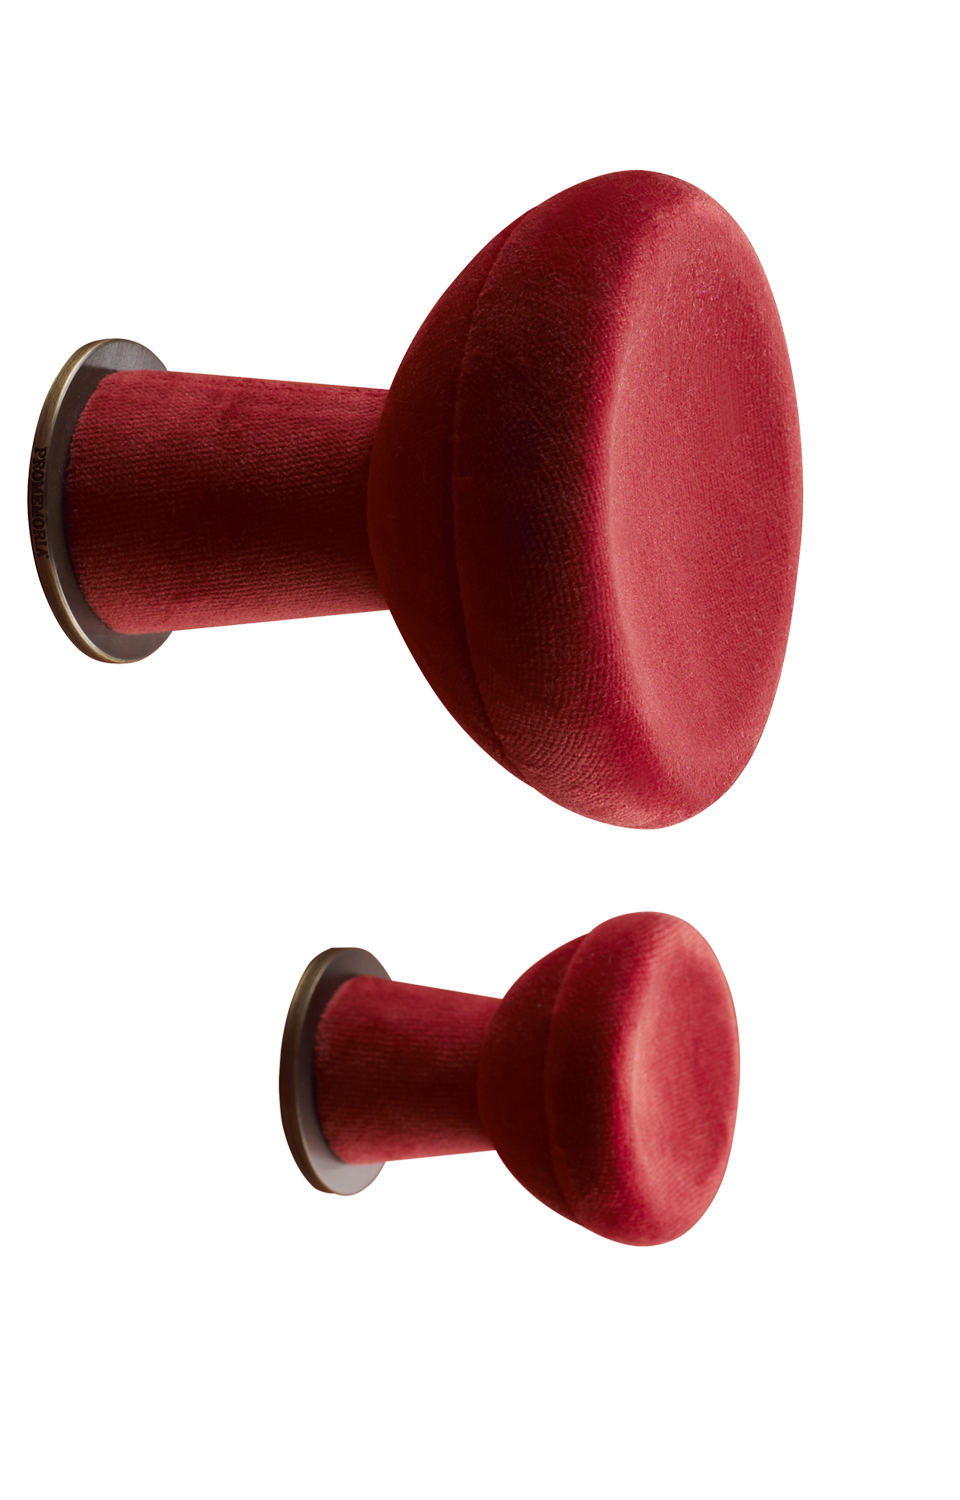 Bottone is a fabric or leather wall hanger shaped like a button, from Promemoria's catalogue | Promemoria